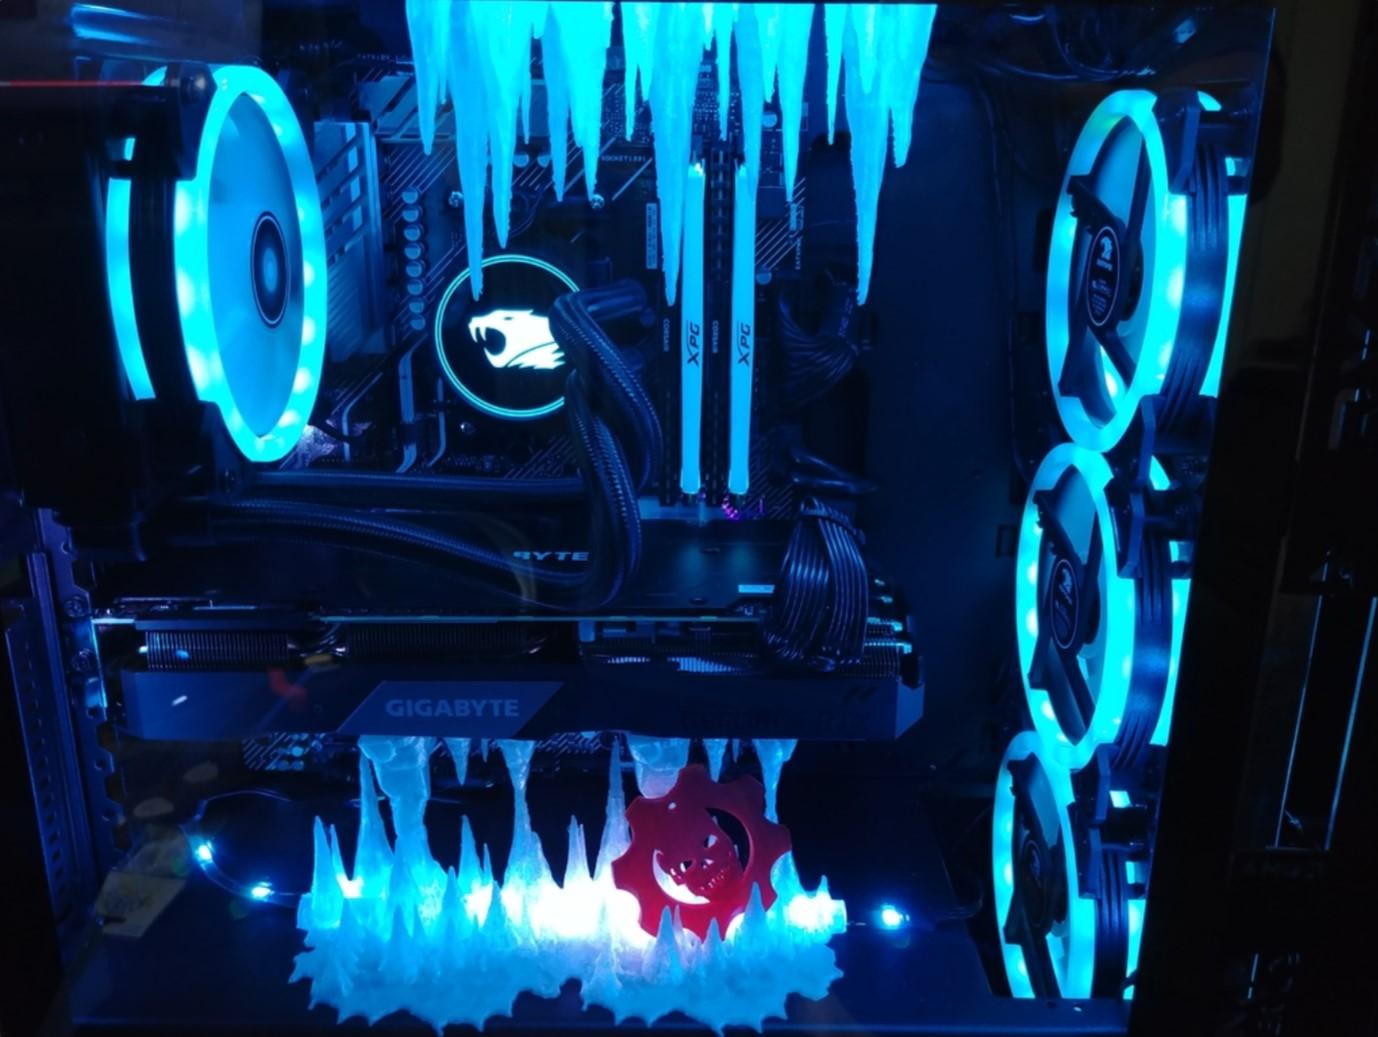 GPU Support ice and Case Decoration 3d model